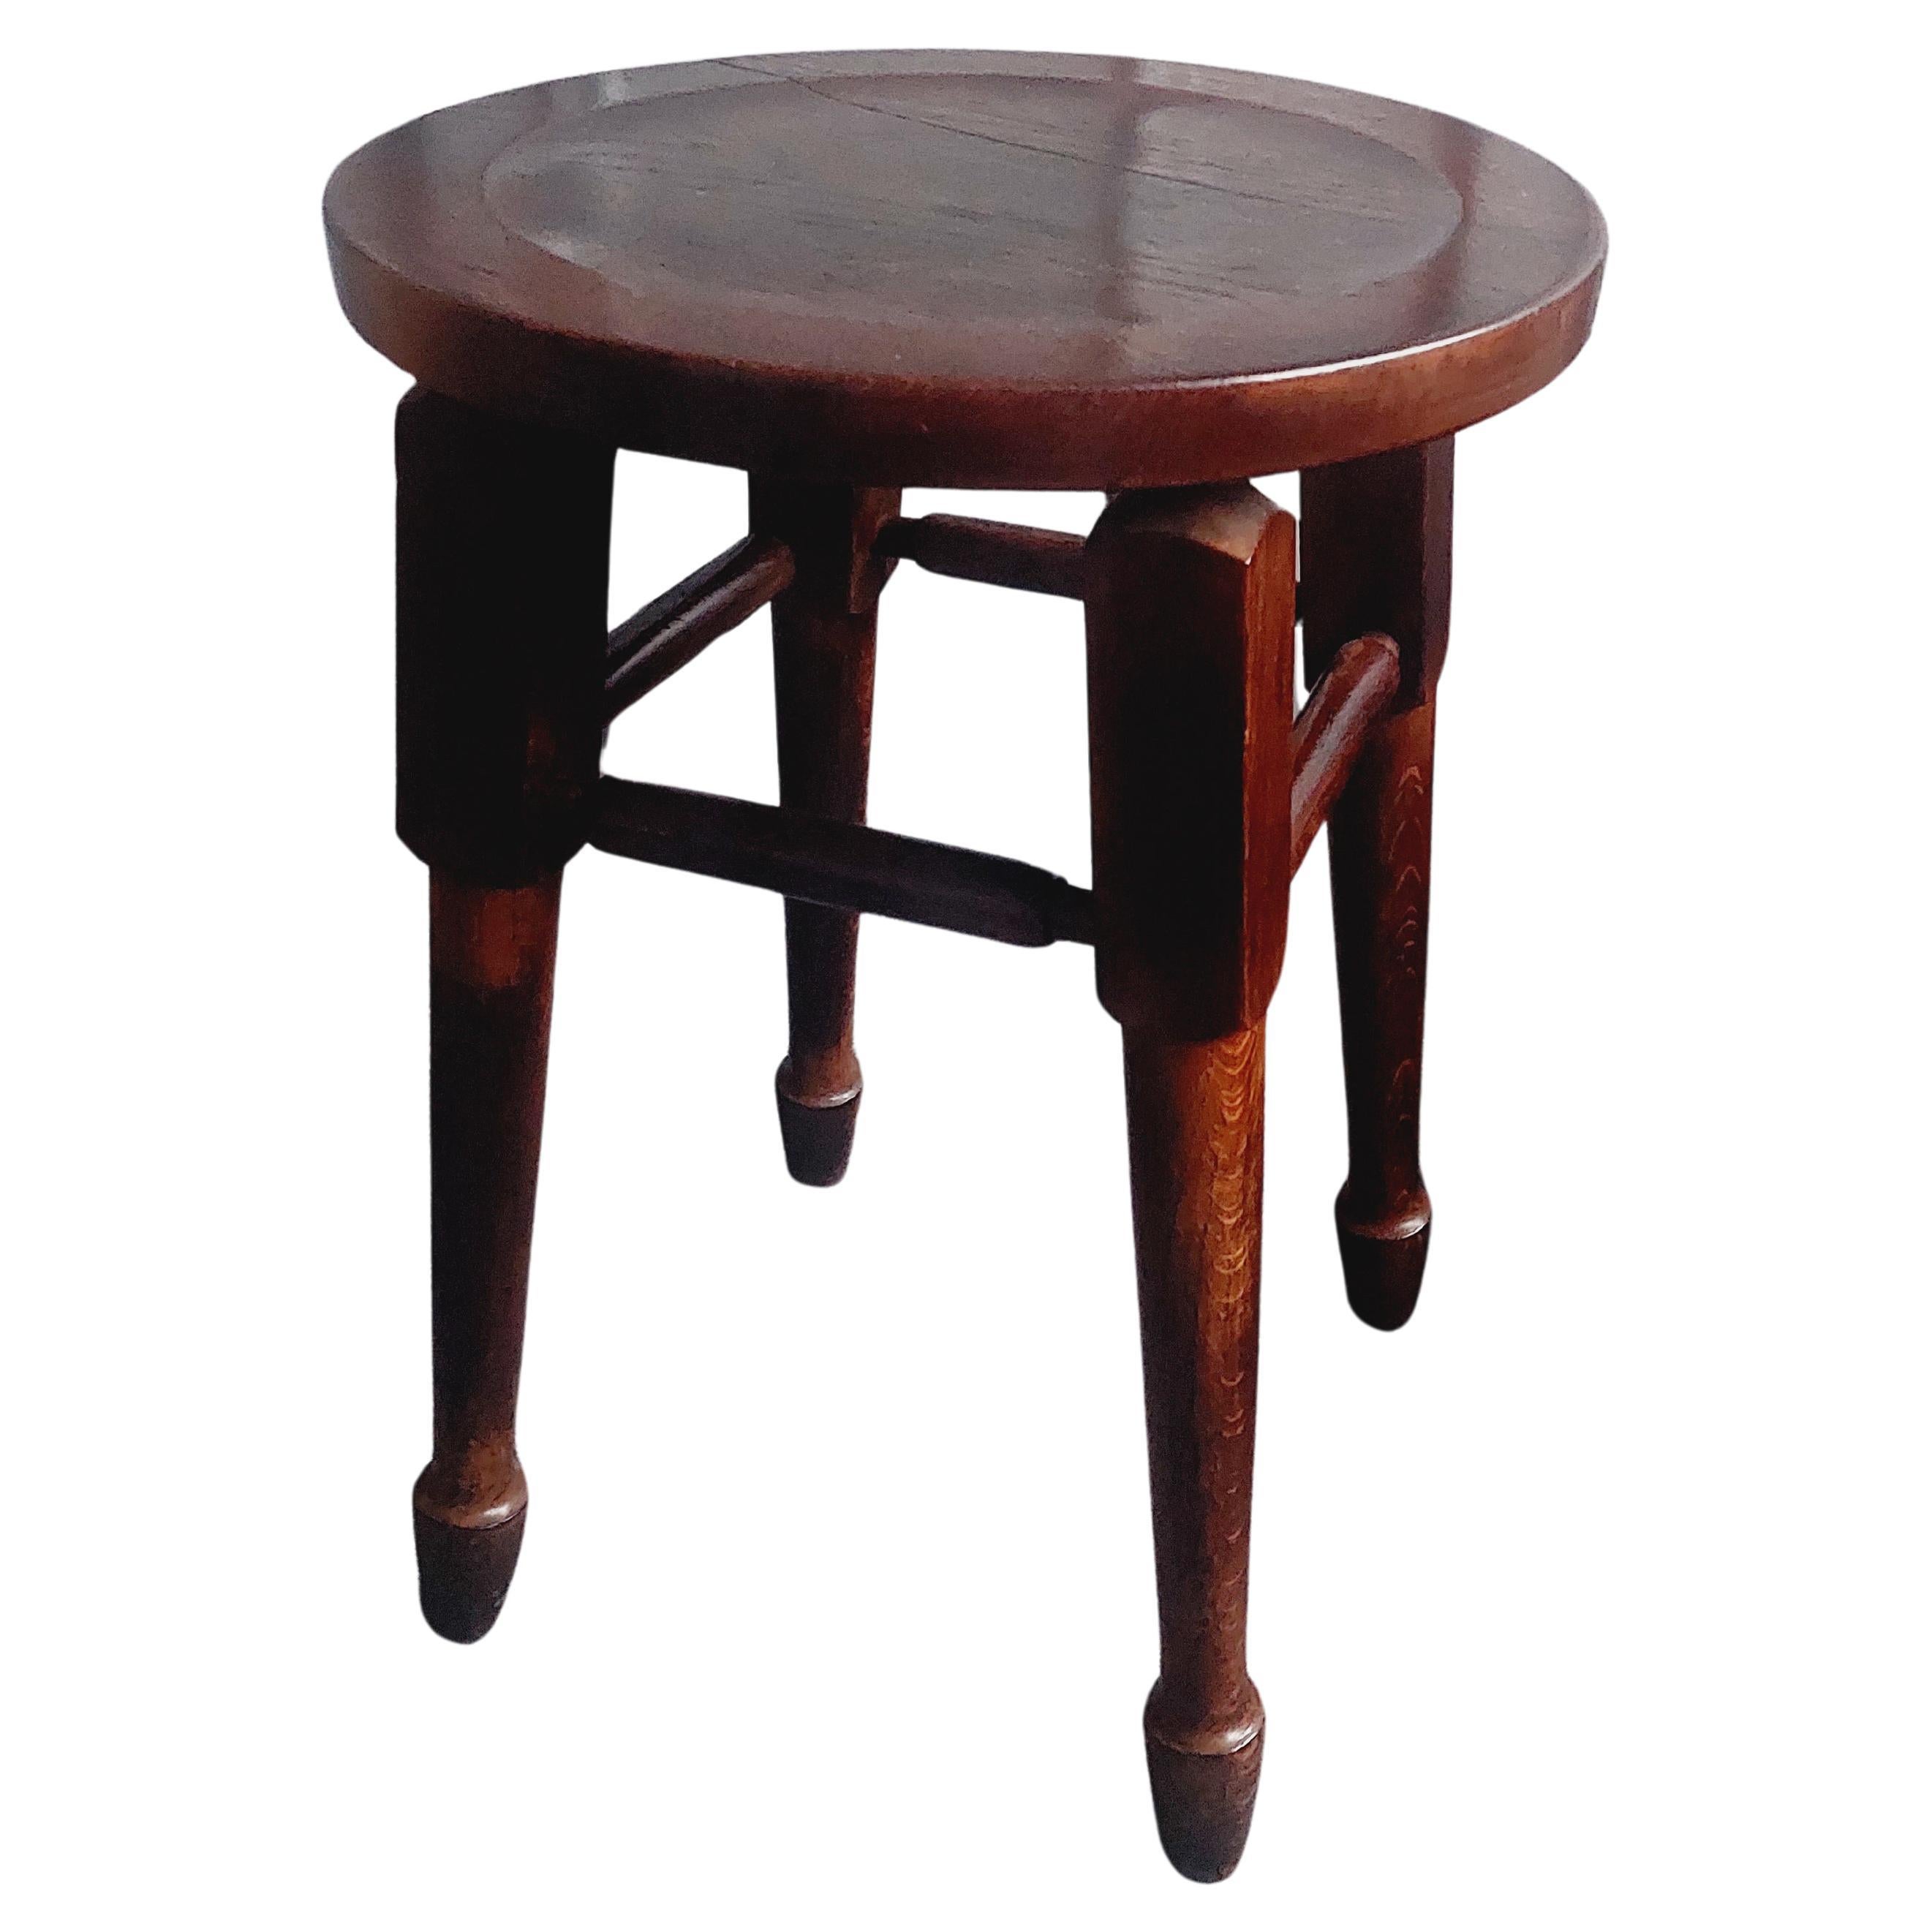 Table d'appoint Arts and Crafts en chêne de Gaskell & Chambers, années 30 en vente